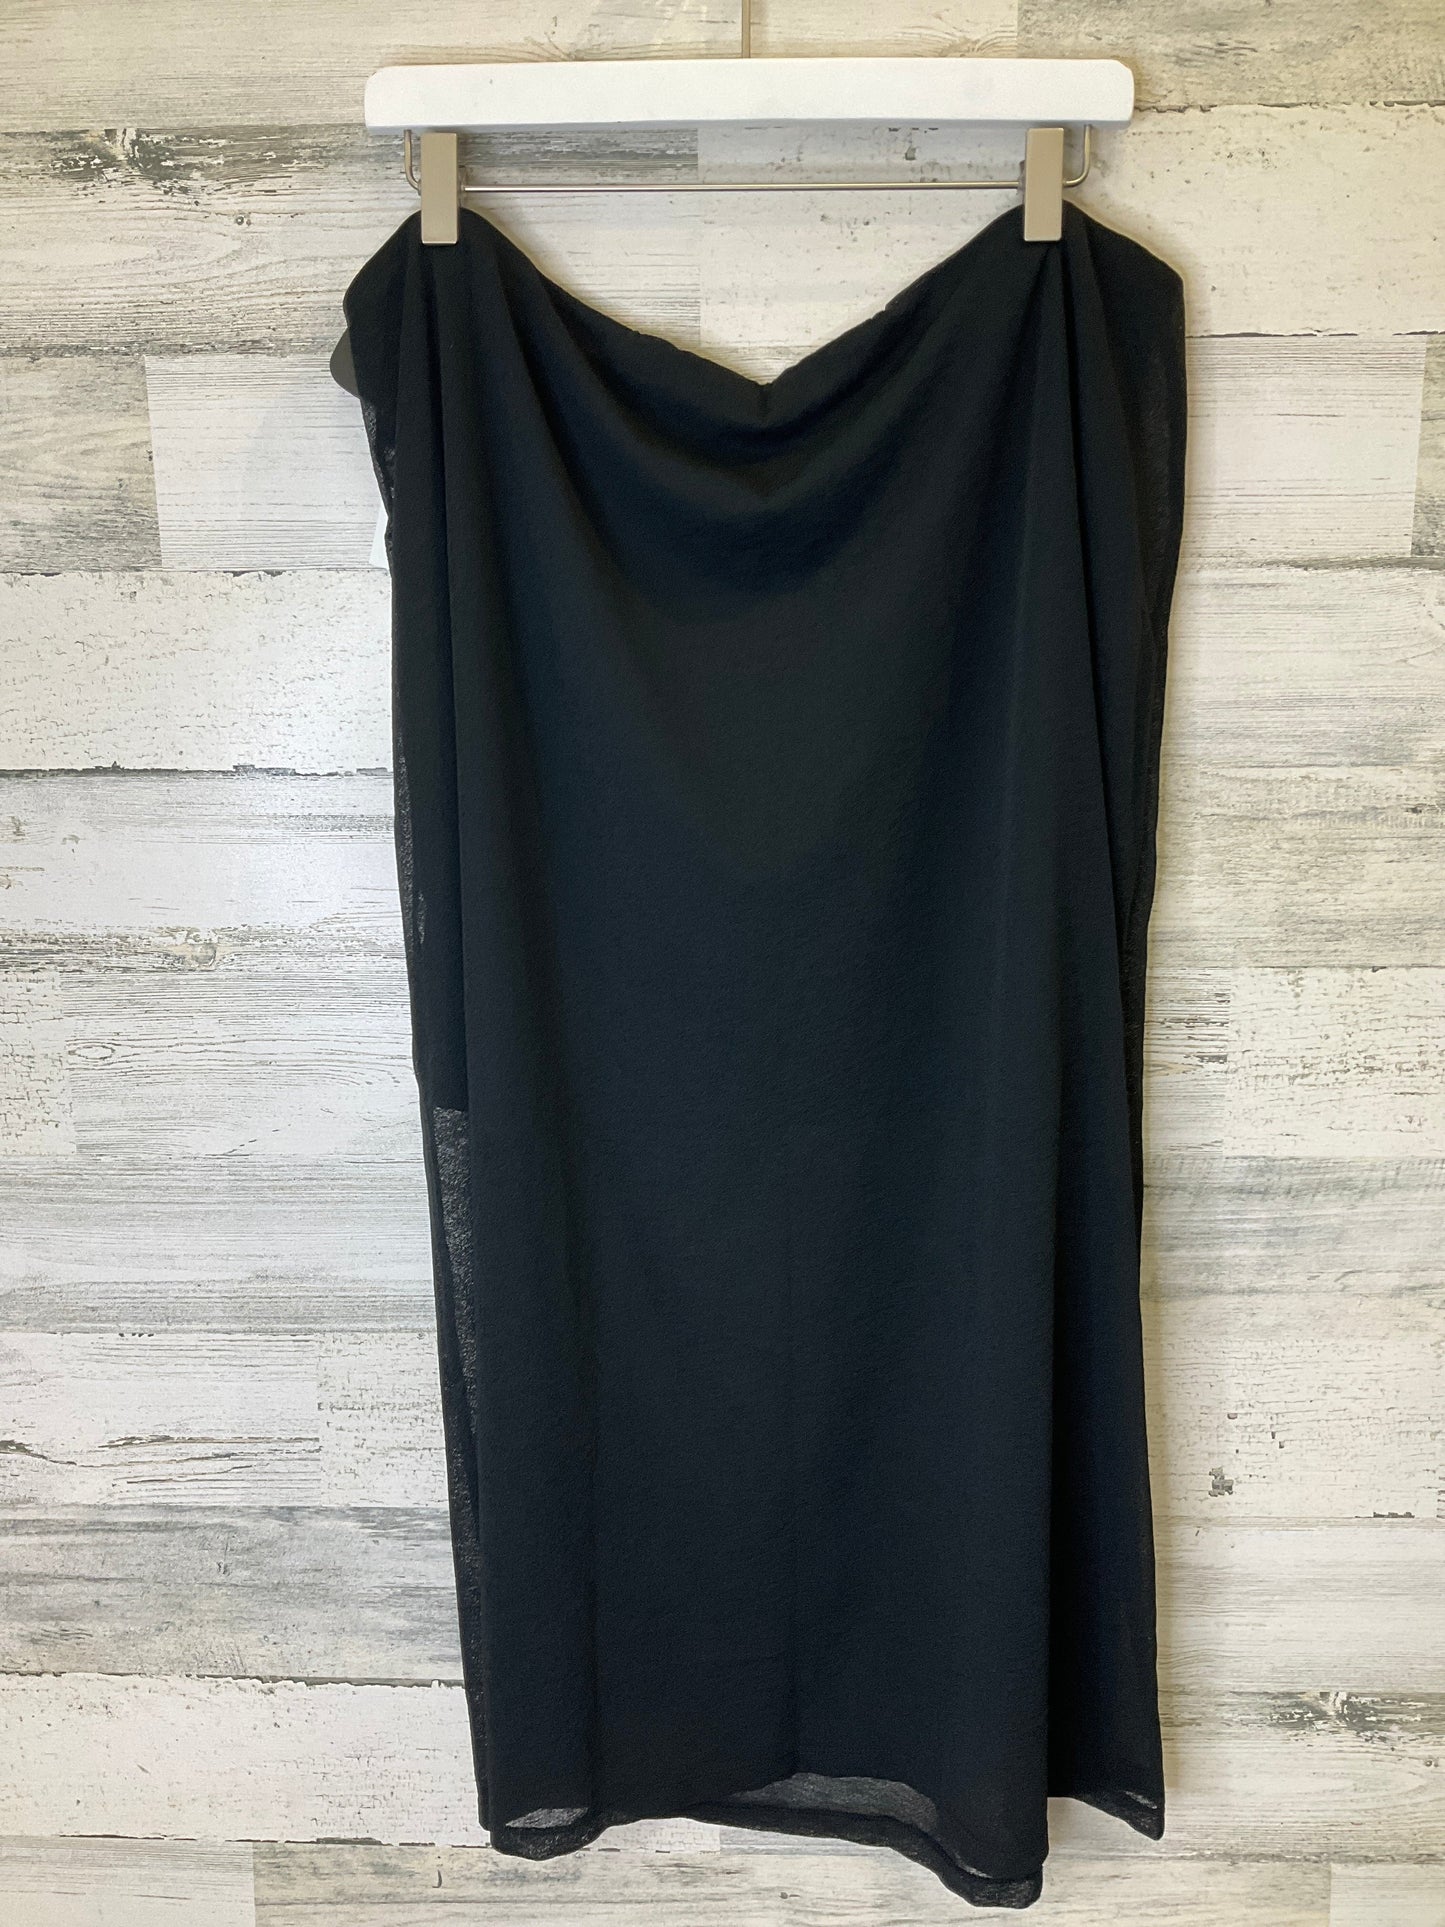 Black Skirt Maxi Abercrombie And Fitch, Size 16